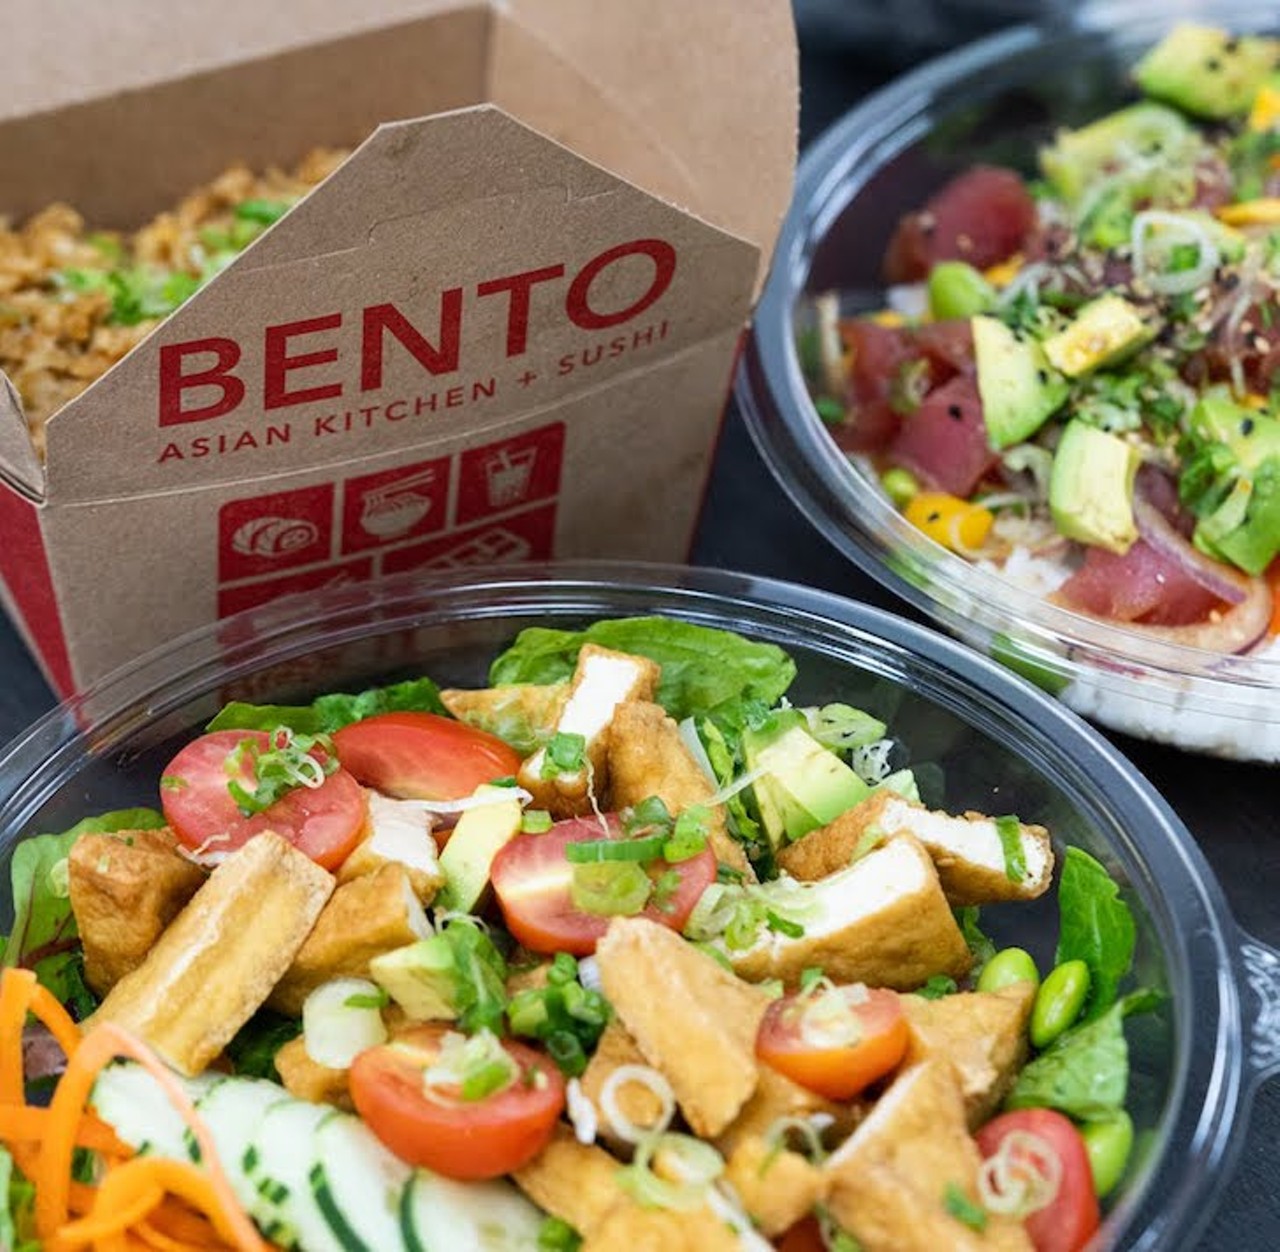 Bento Asian Kitchen + Sushi
Locations: 3 Orlando, Gainesville, Jacksonville, Tallahassee, St. Petersburg, Davie
This Florida-based Pan-Asian chain offers everything from sushi to pad Thai to Vietnamese pork chop. Enjoy rice bowls, noodle bowls and bento boxes that are big enough to last for several meals and tasty enough that you&#146;ll want to eat it for several meals in a row.
Photo via BENTO asian kitchen + sushi/Facebook